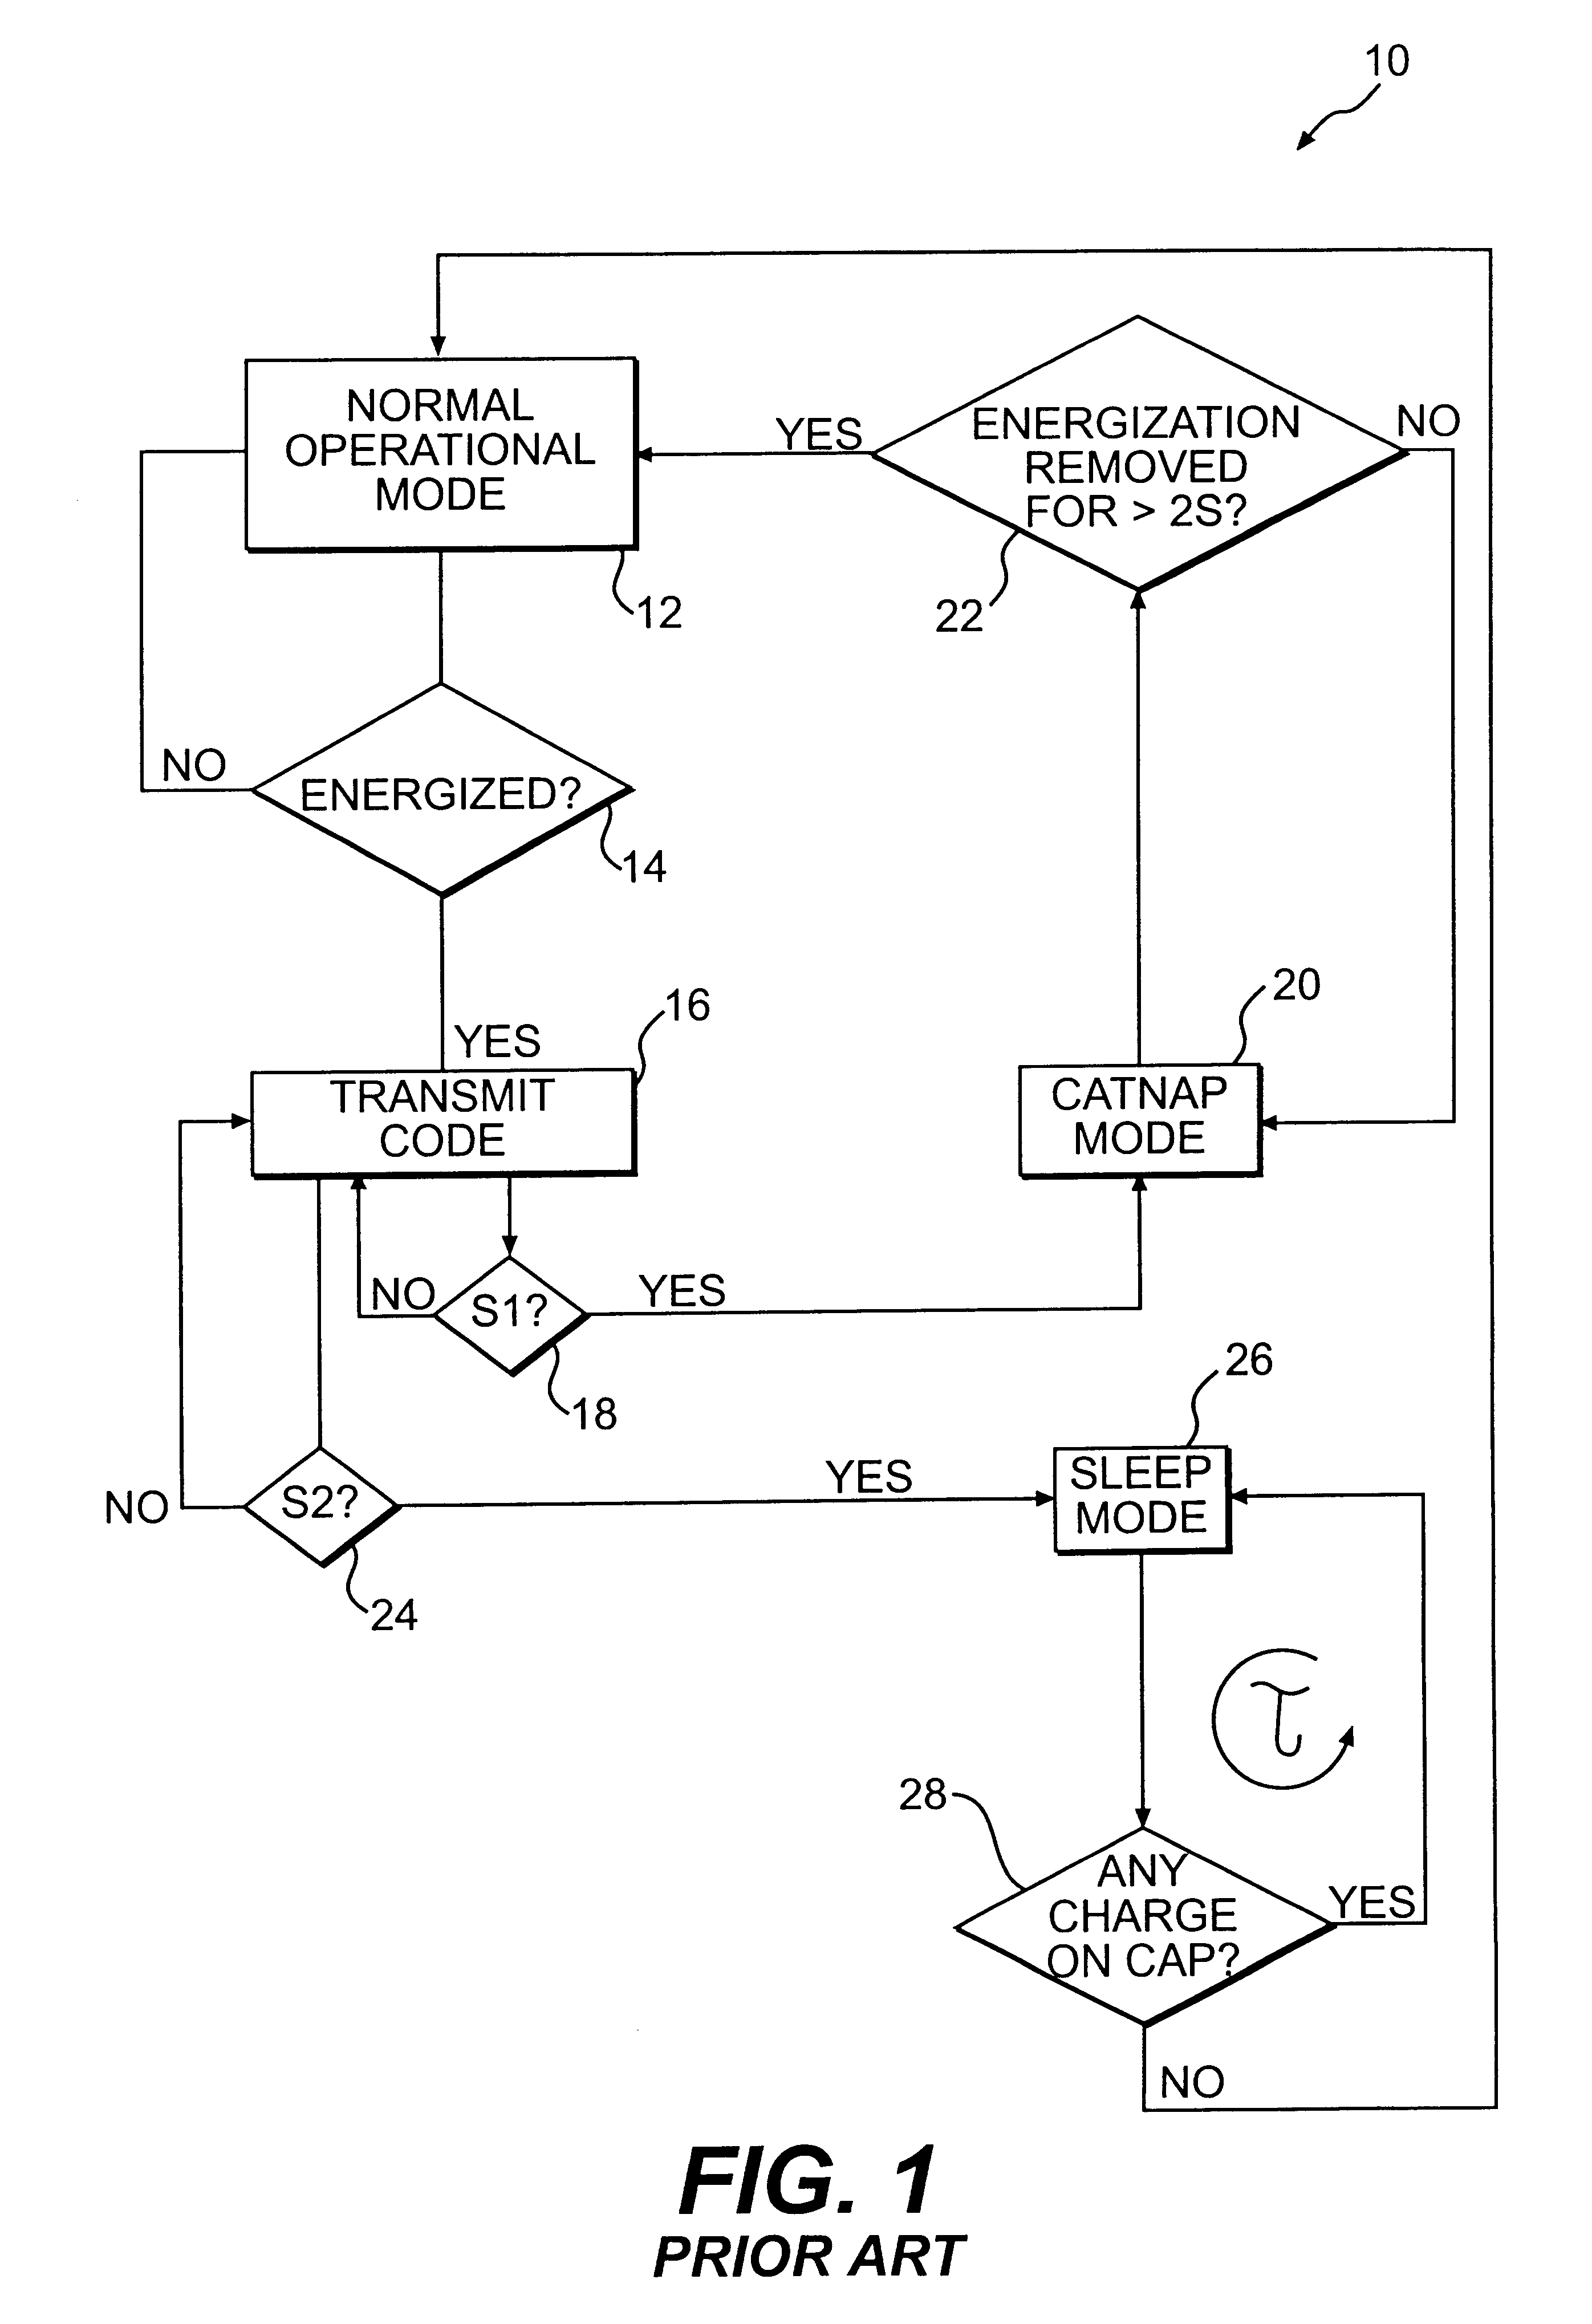 Delayed reset mode model for electronic identification systems